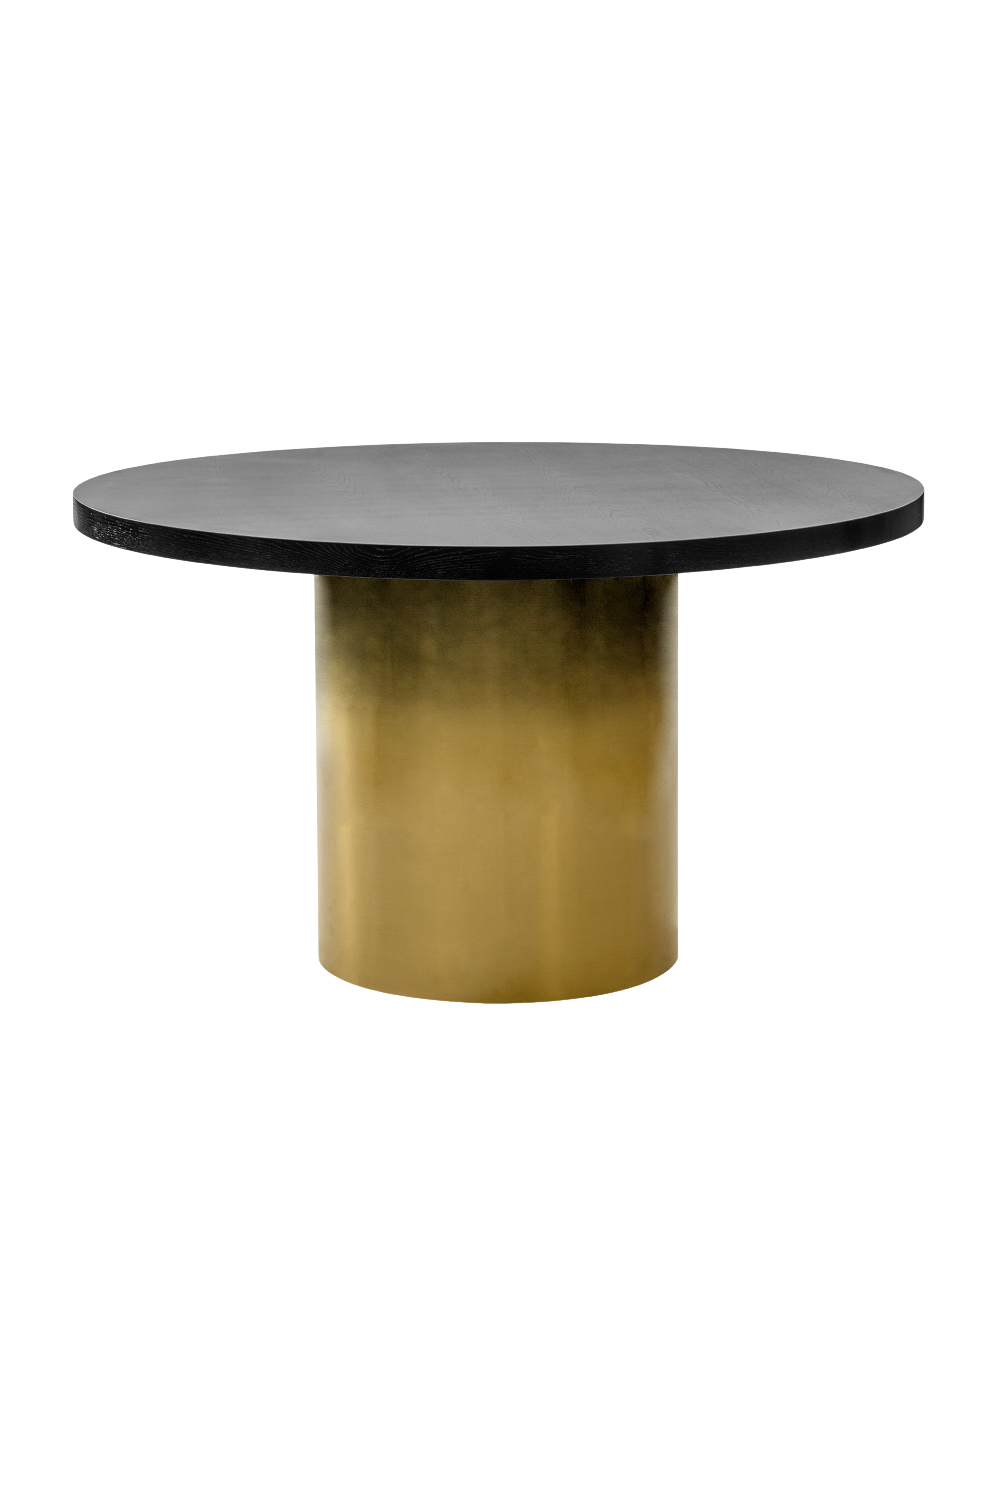 Two-Toned Round Dining Table | Liang & Eimil Dim | Oroa.com